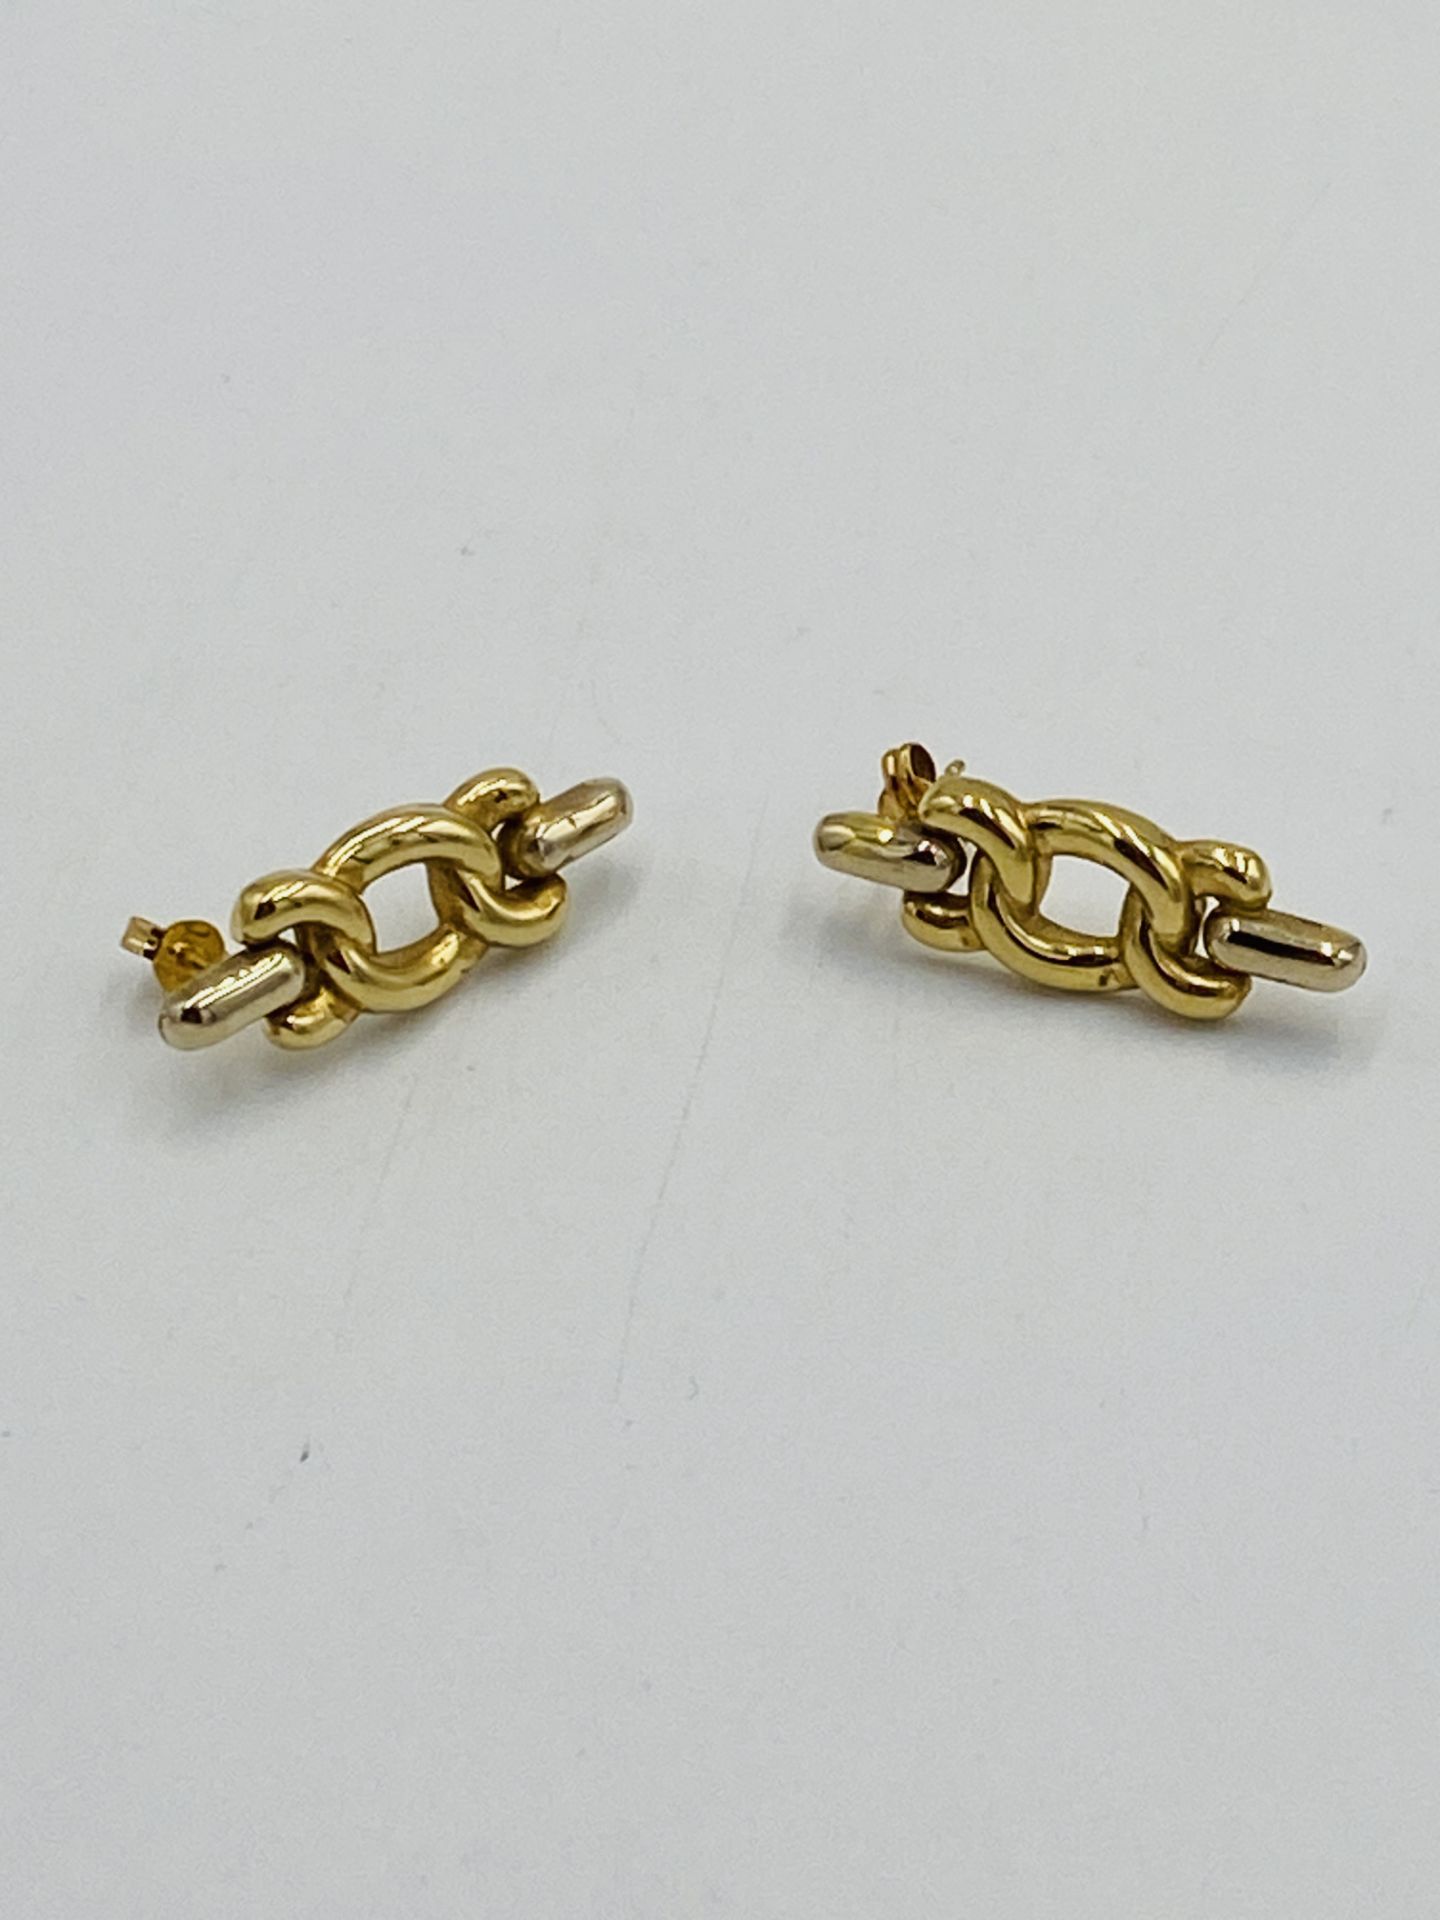 Pair of 18ct gold earrings - Image 3 of 3